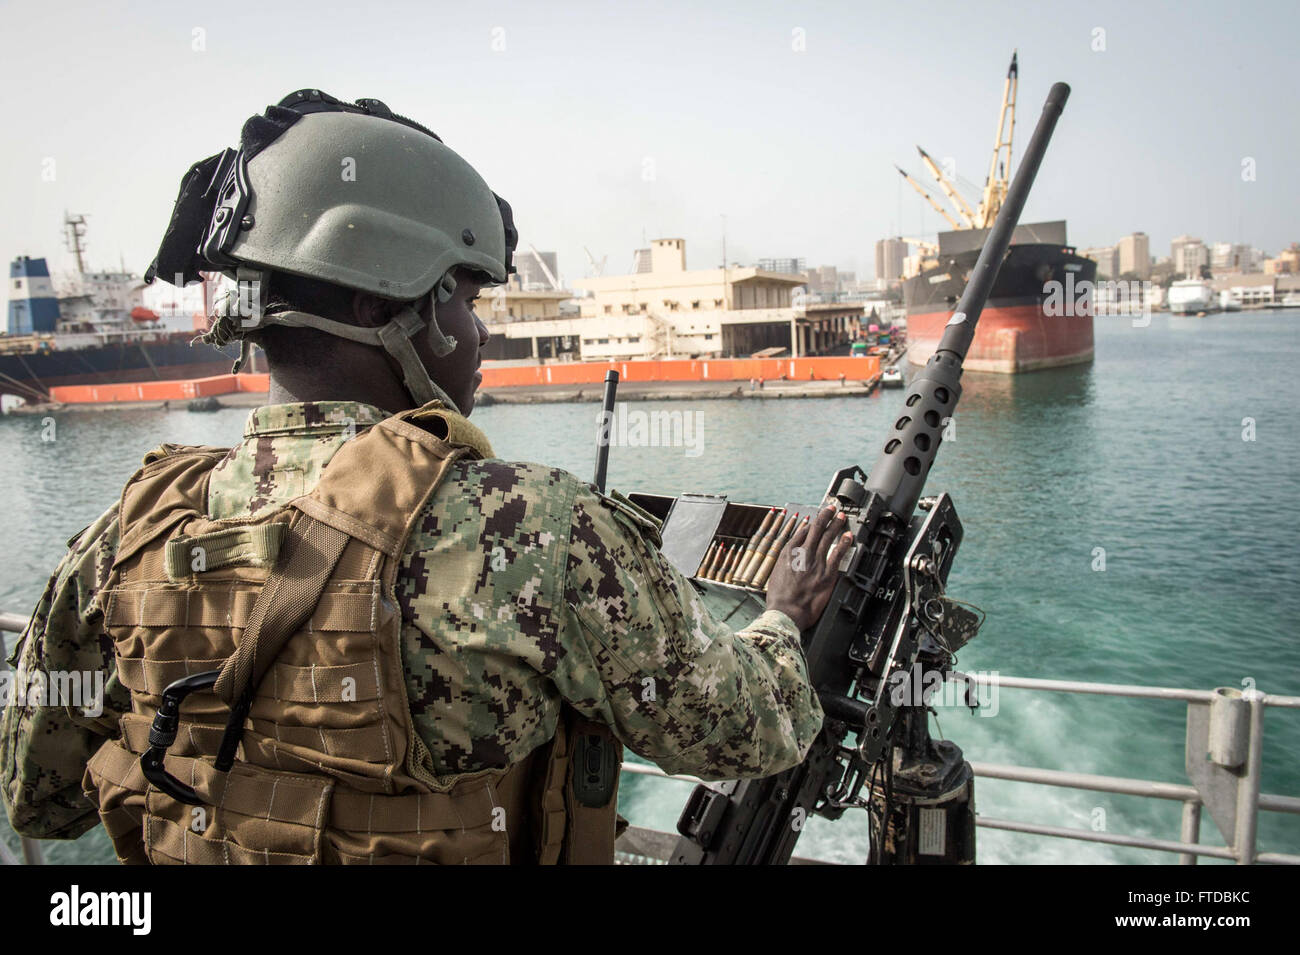 150417-N-EC444-121 DAKAR, Senegal (April 17, 2015) Boatswain’s Mate Seaman Cheeseman Johnson, from Charlotte, North Carolina, stands security watch aboard the Military Sealift Command’s joint high-speed vessel USNS Spearhead (JHSV 1) April 17, 2015. Spearhead is on a scheduled deployment to the U.S. 6th Fleet area of operations in support of the international collaborative capacity-building program Africa Partnership Station. (U.S. Navy photo by Lt. Sonny Lorrius/Released) Stock Photo